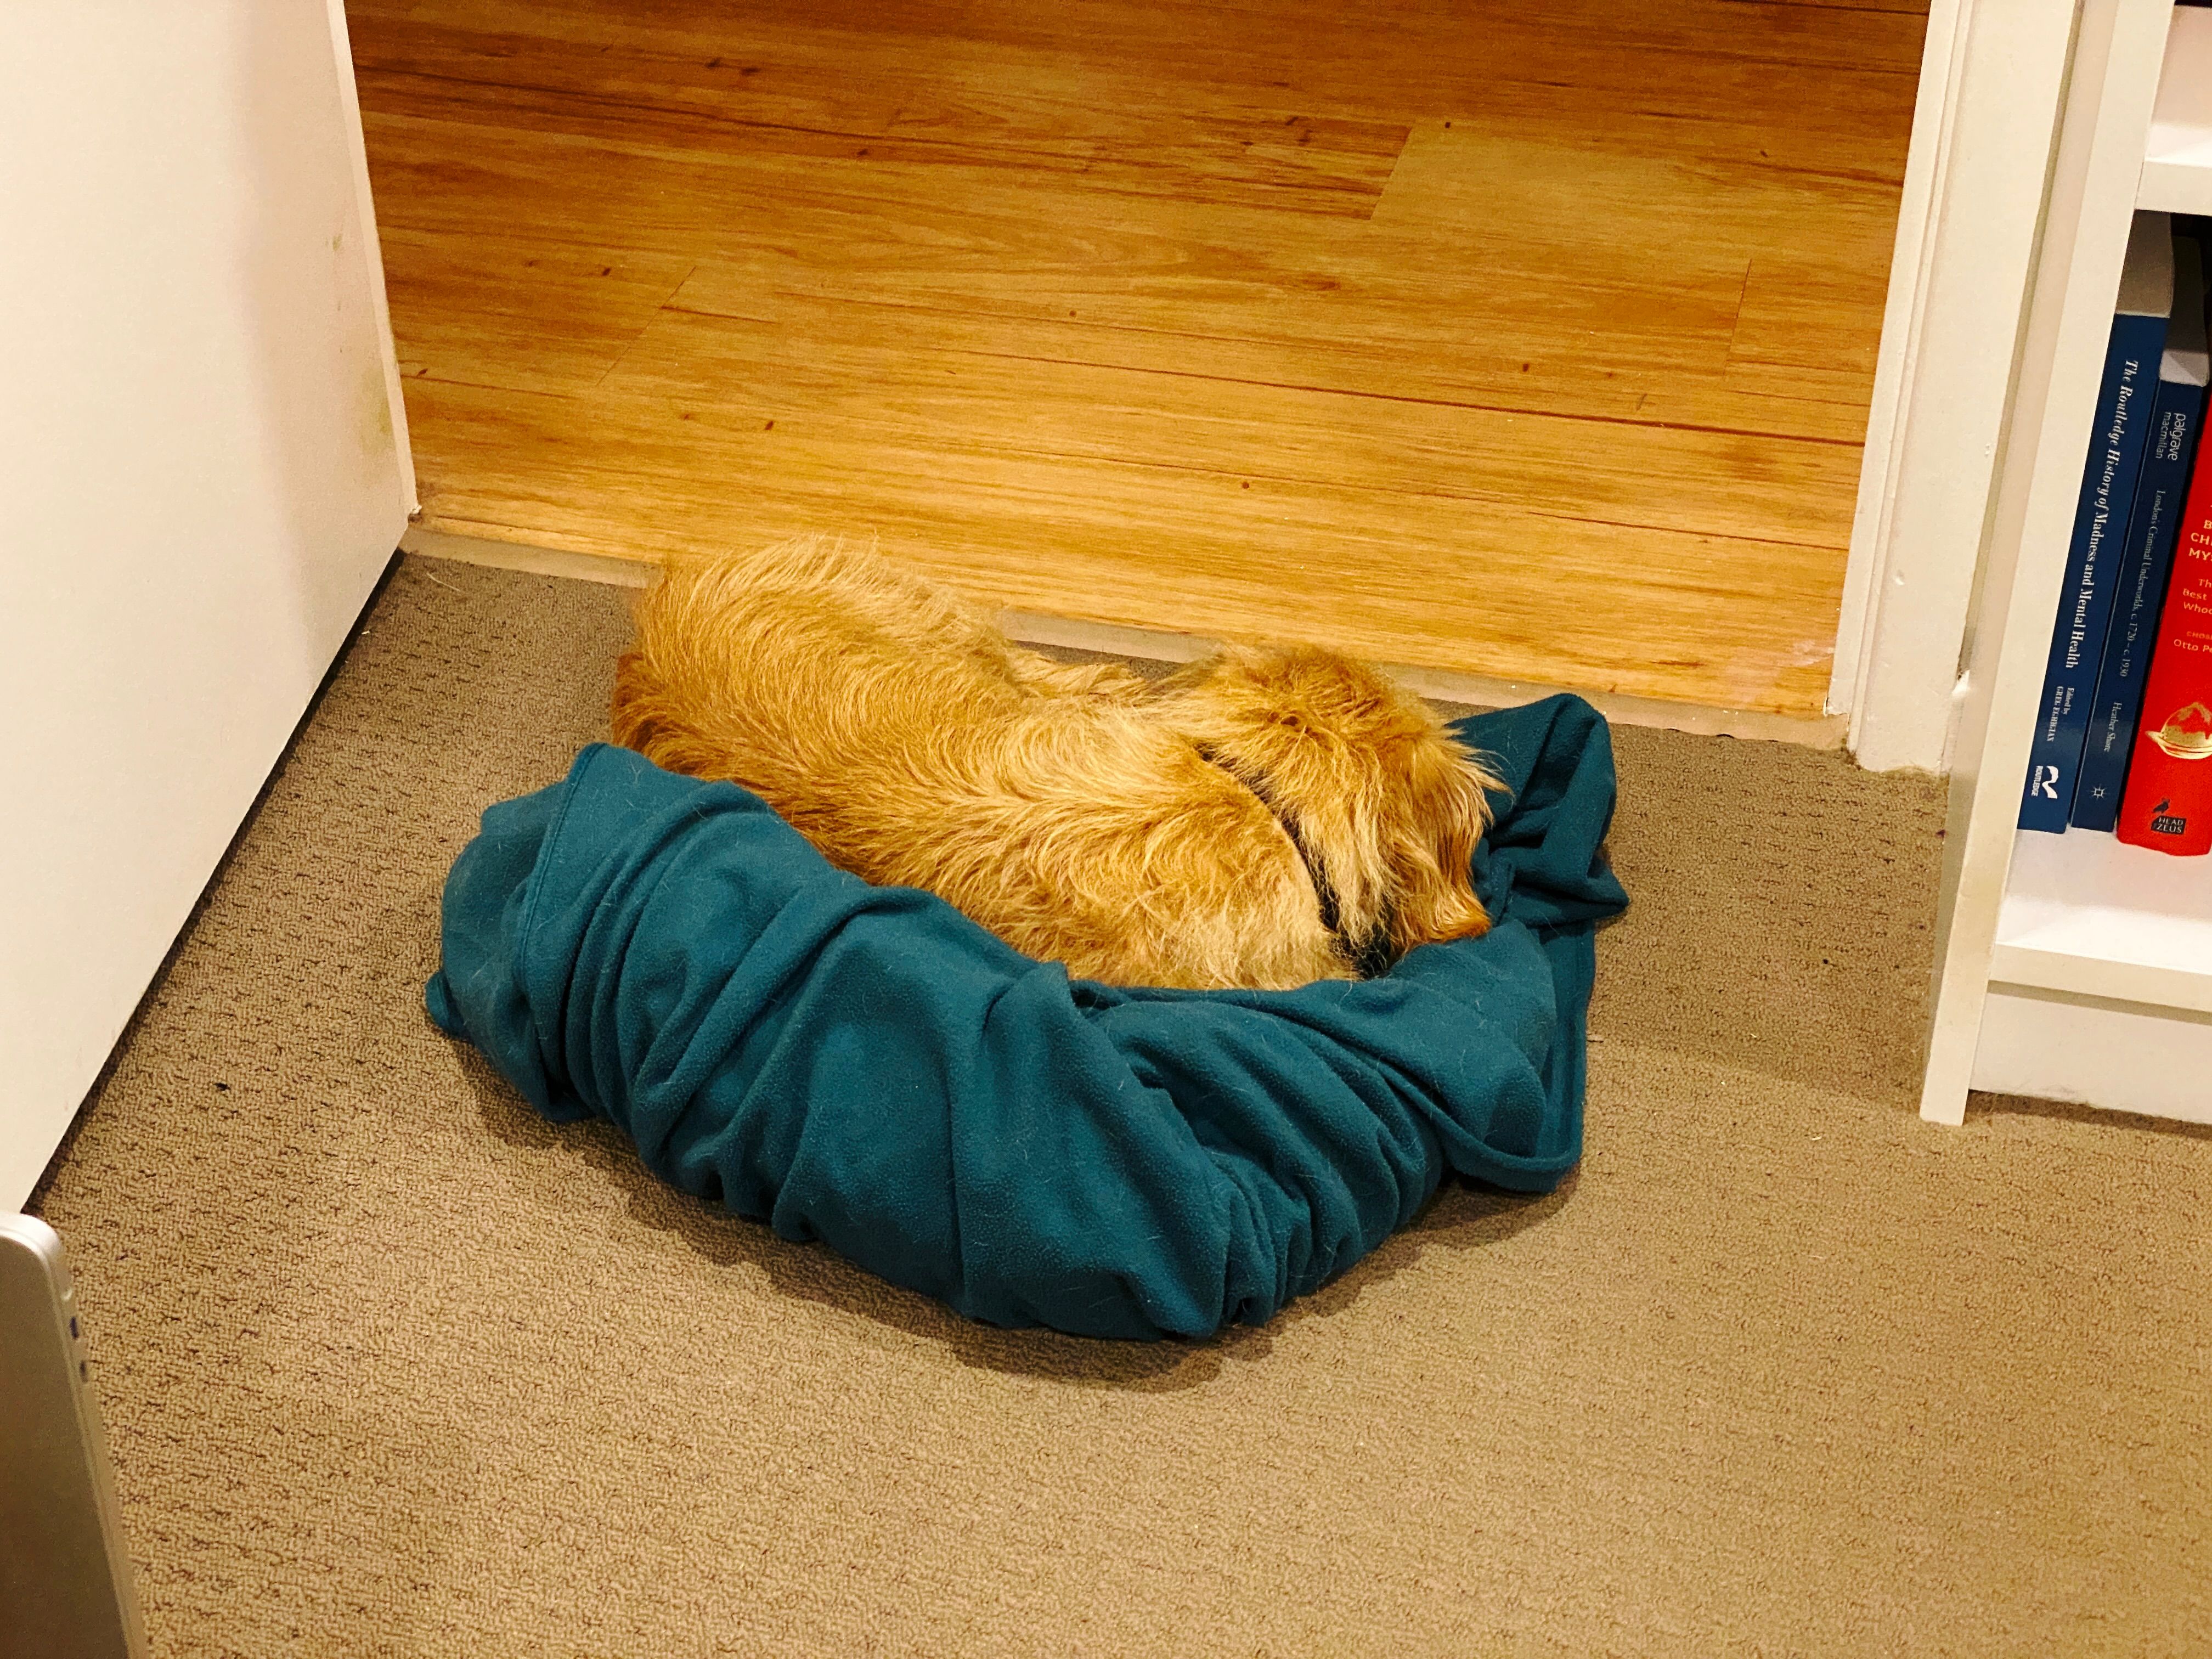 A photo of a small scruffy blonde dog curled up on a green blanket that's been rolled-slash-balled up right in front of a doorway.